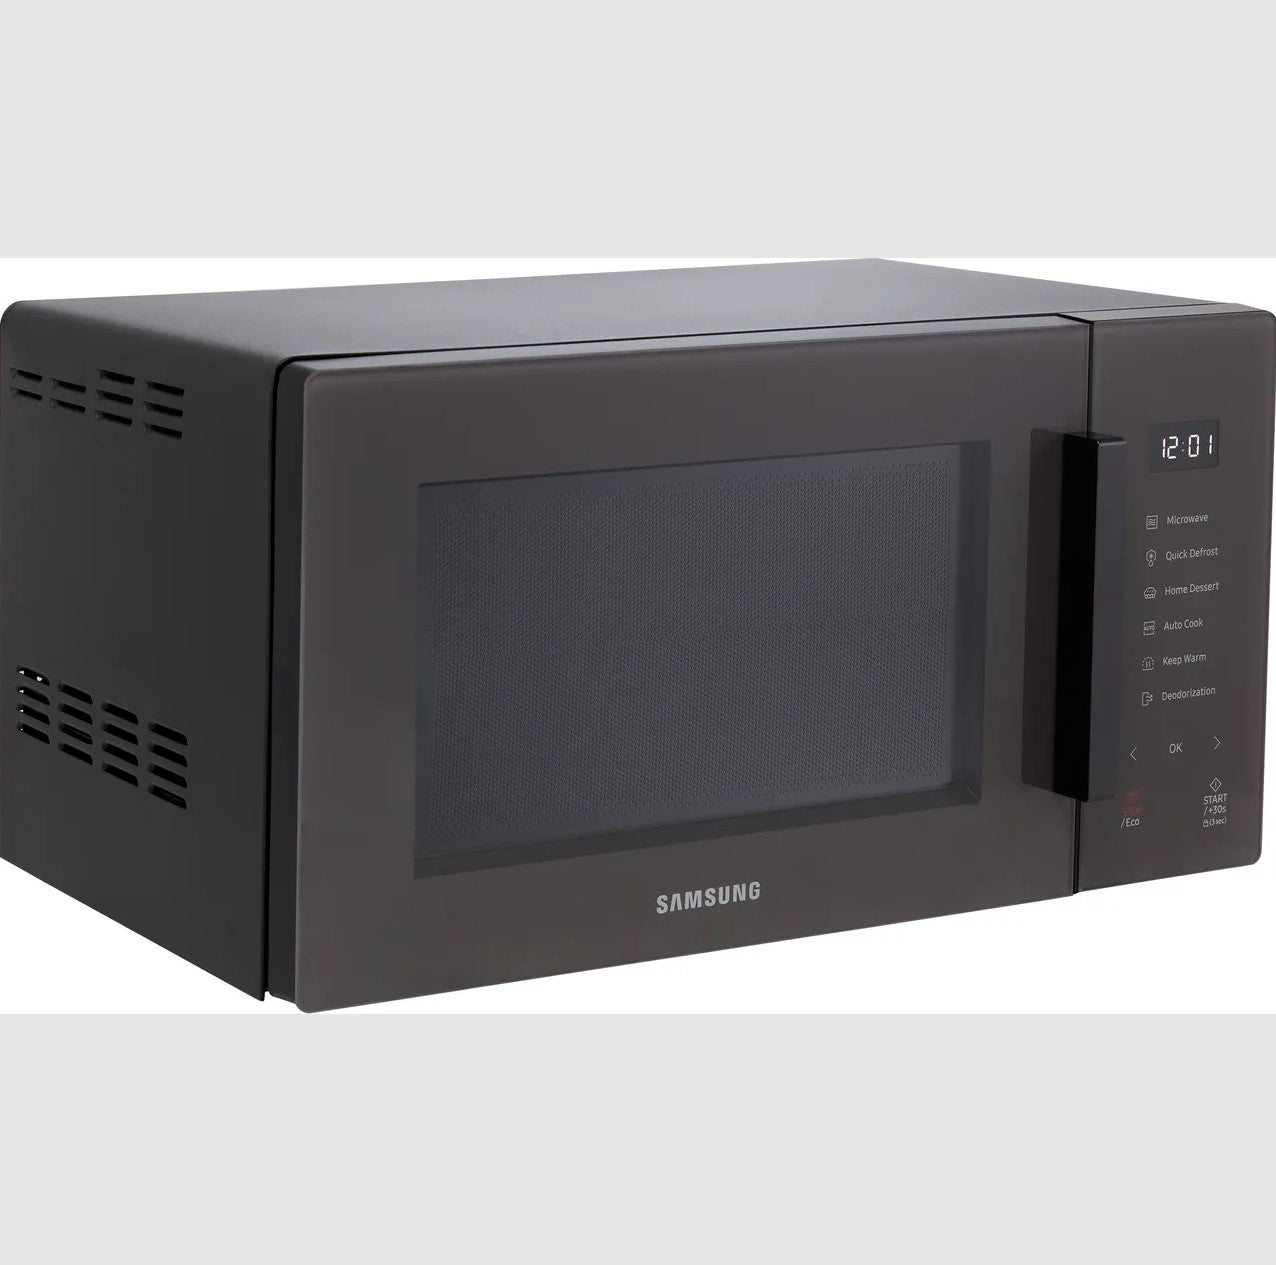 Samsung MS23T5018AC Solo Microwave Freestanding 23L in Grey